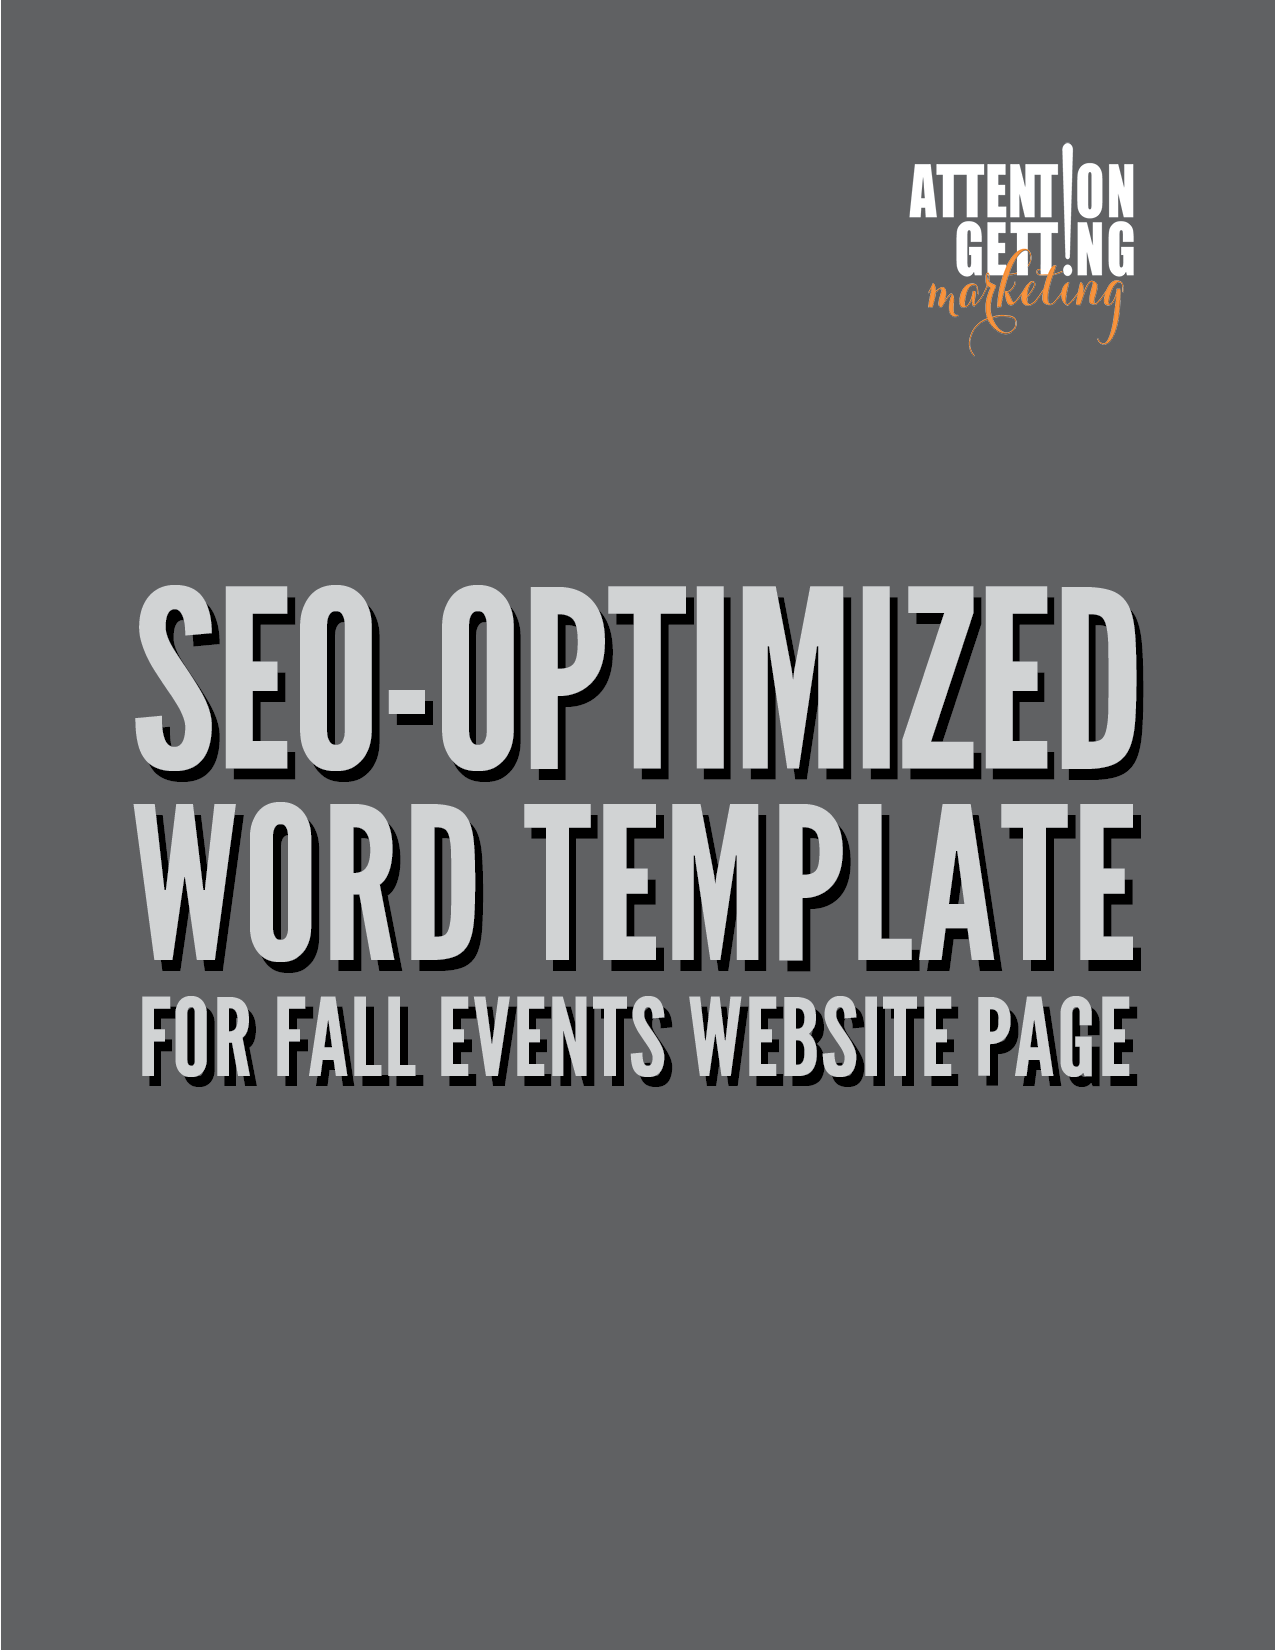 SEO-Optimized Website / Blog Page Template in Word for Fall Events